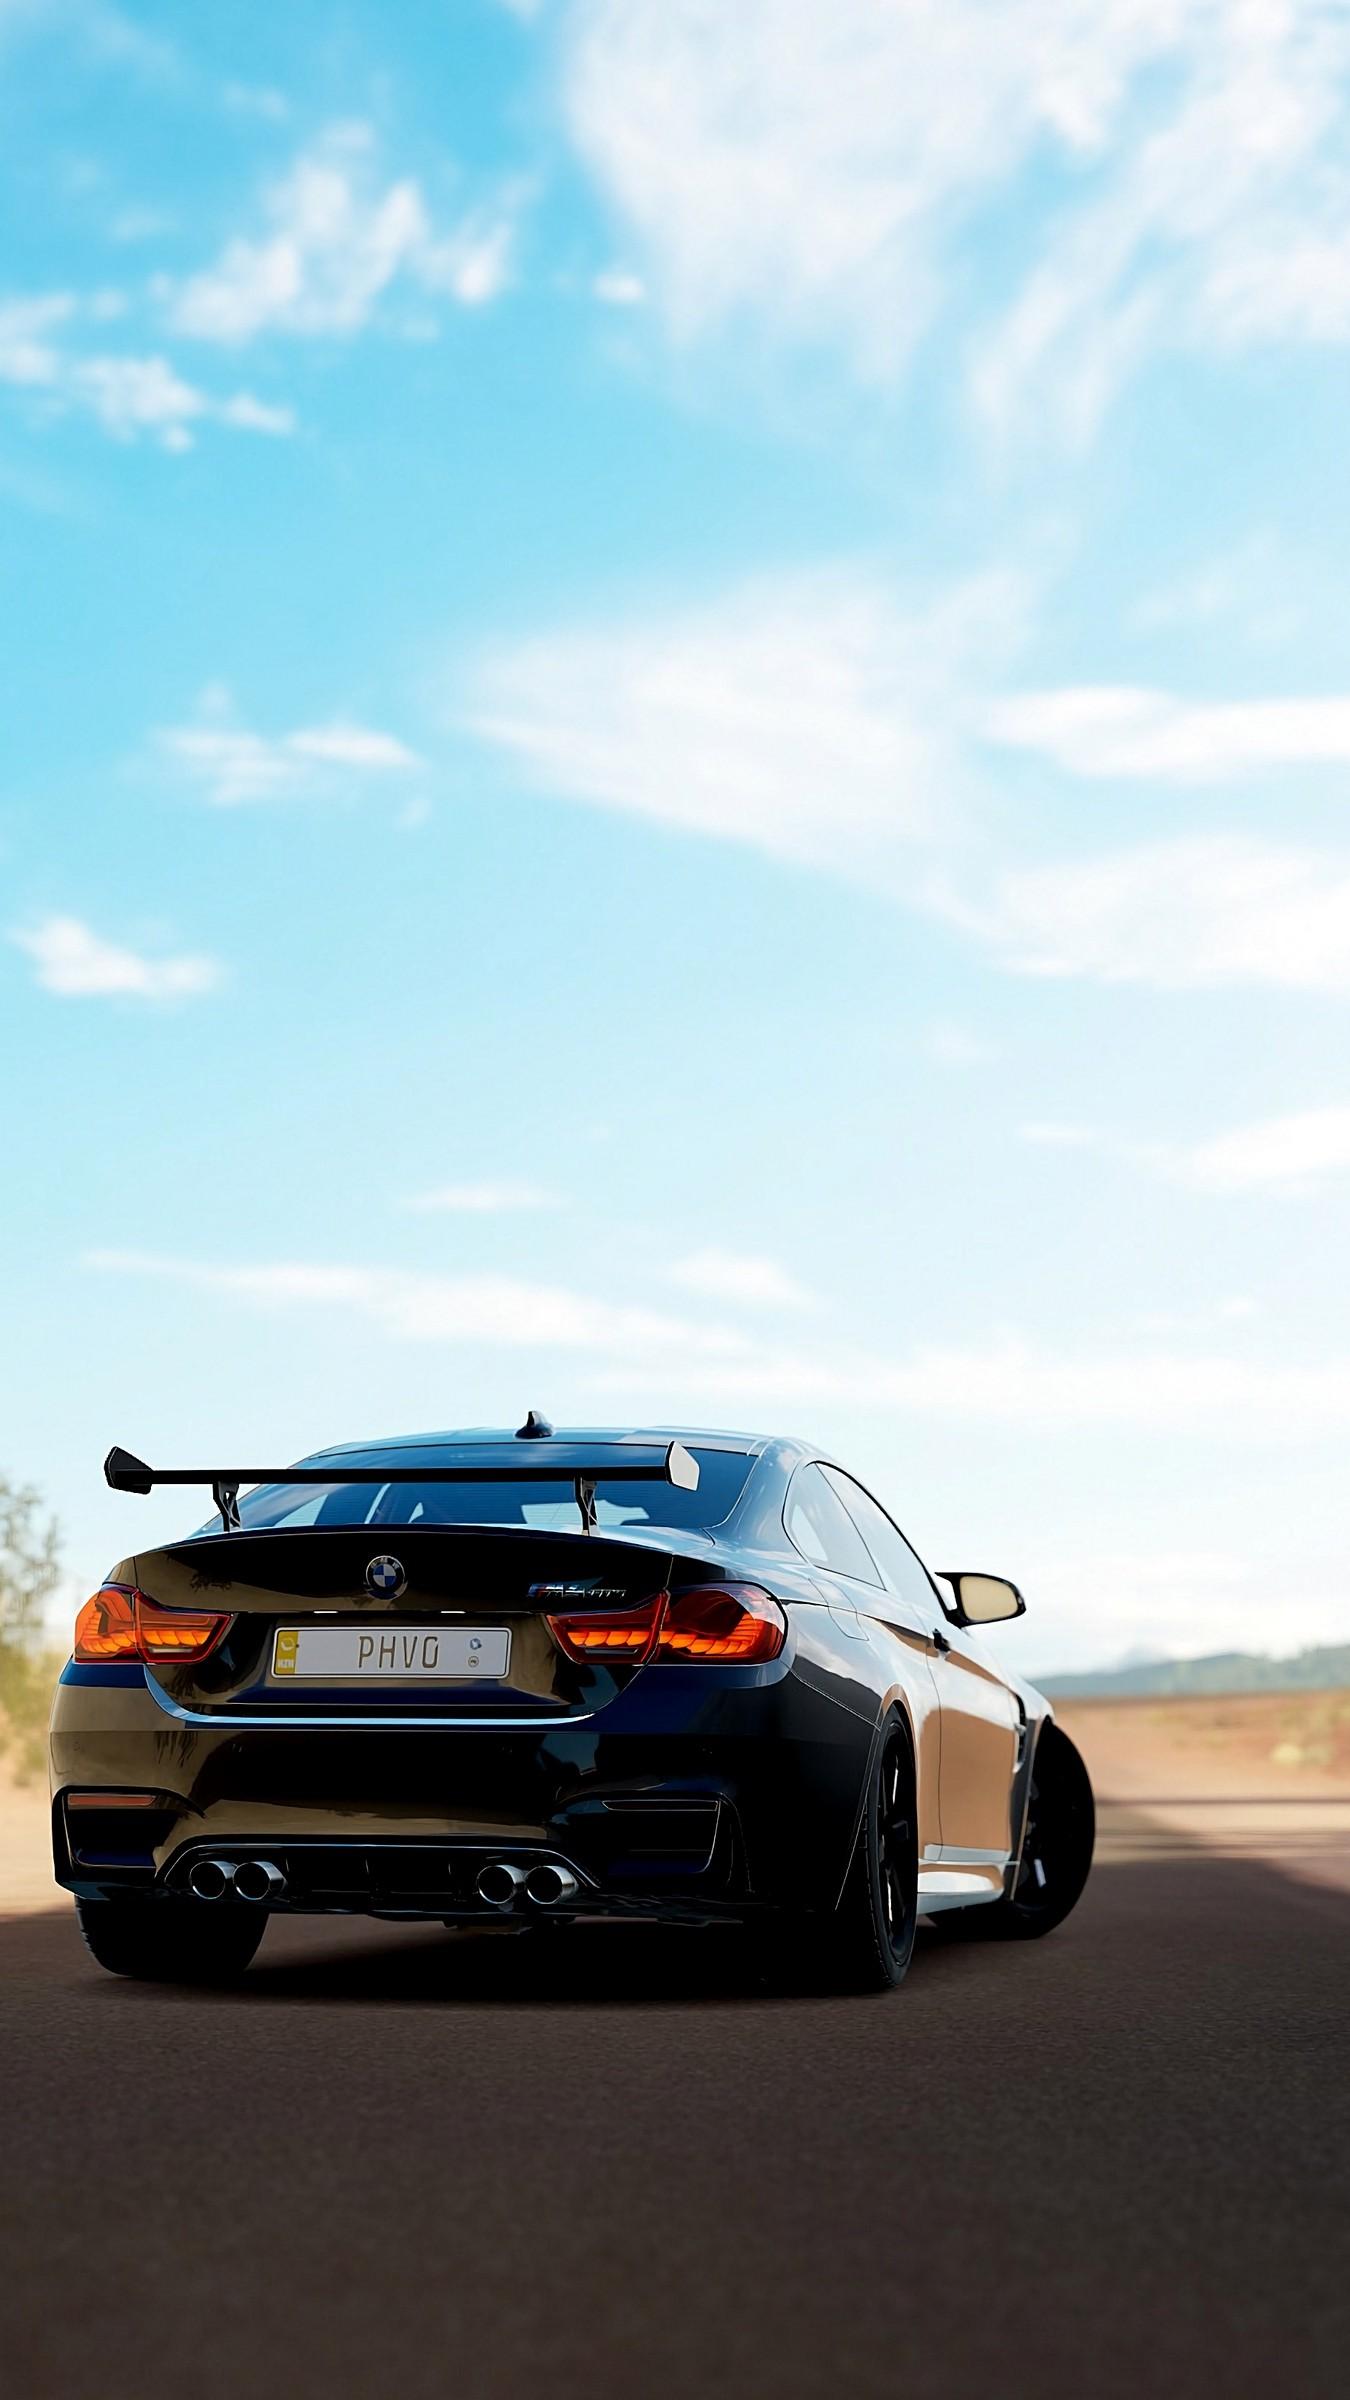 Bmw Iphone Wallpapers